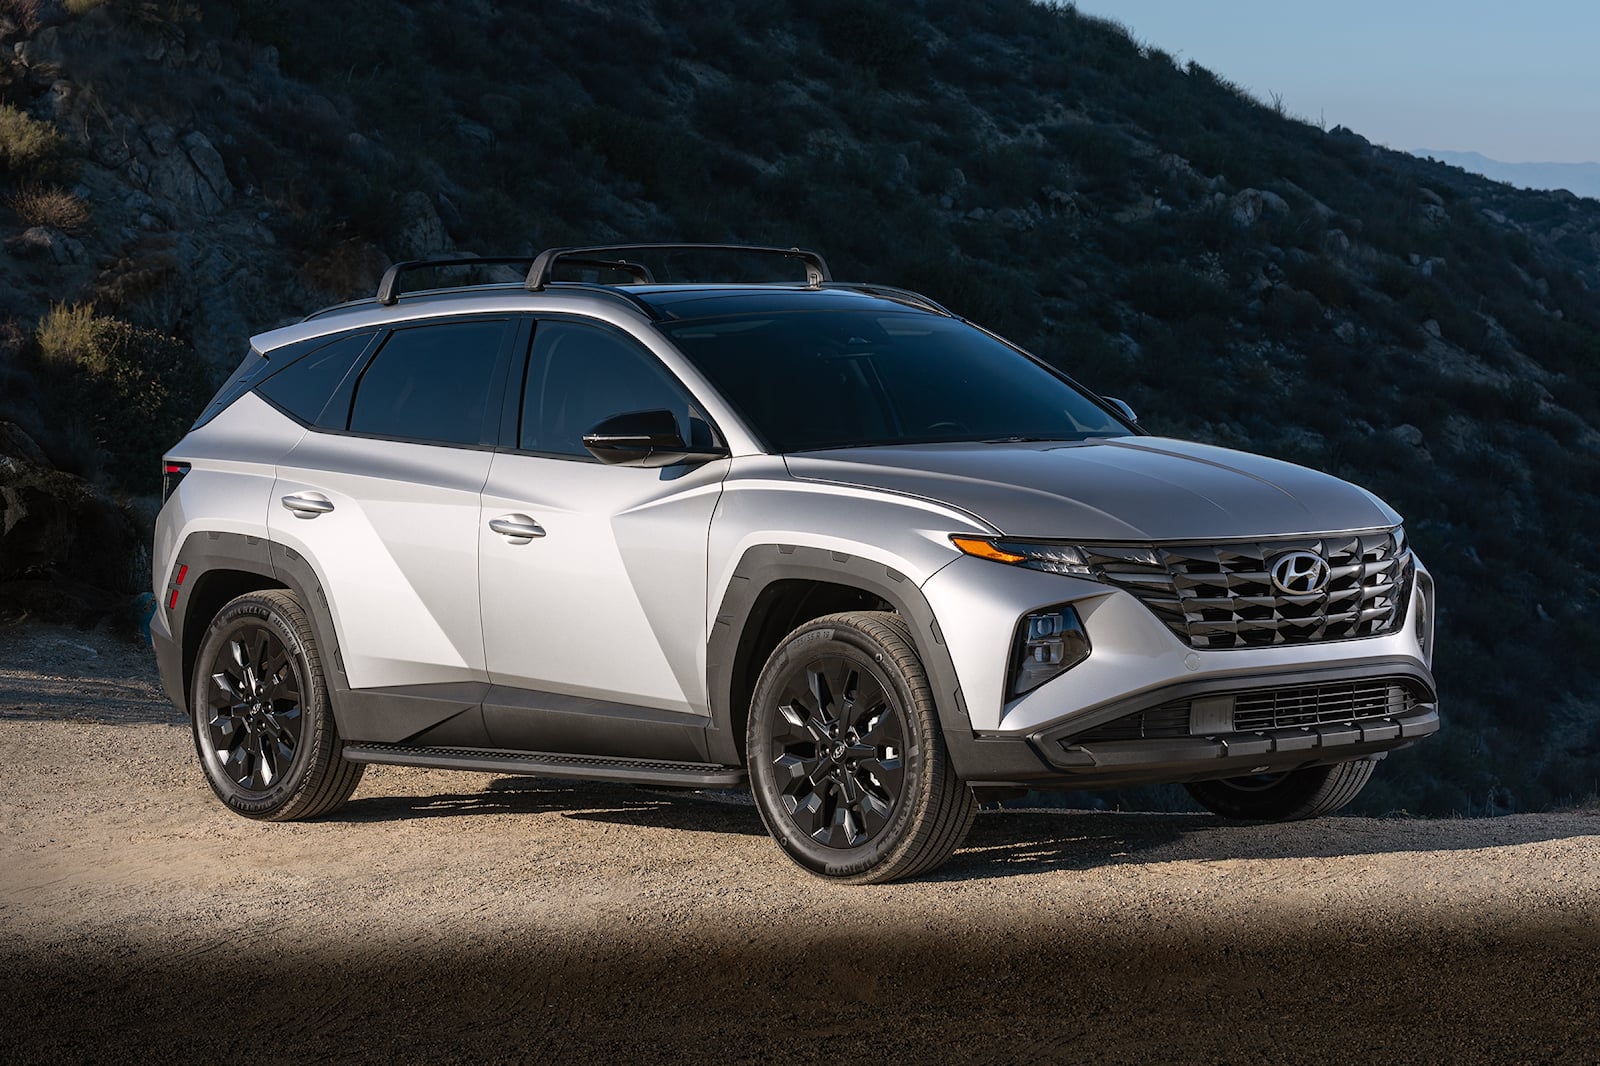 The 2022 Hyundai Tucson XRT parked in dirt